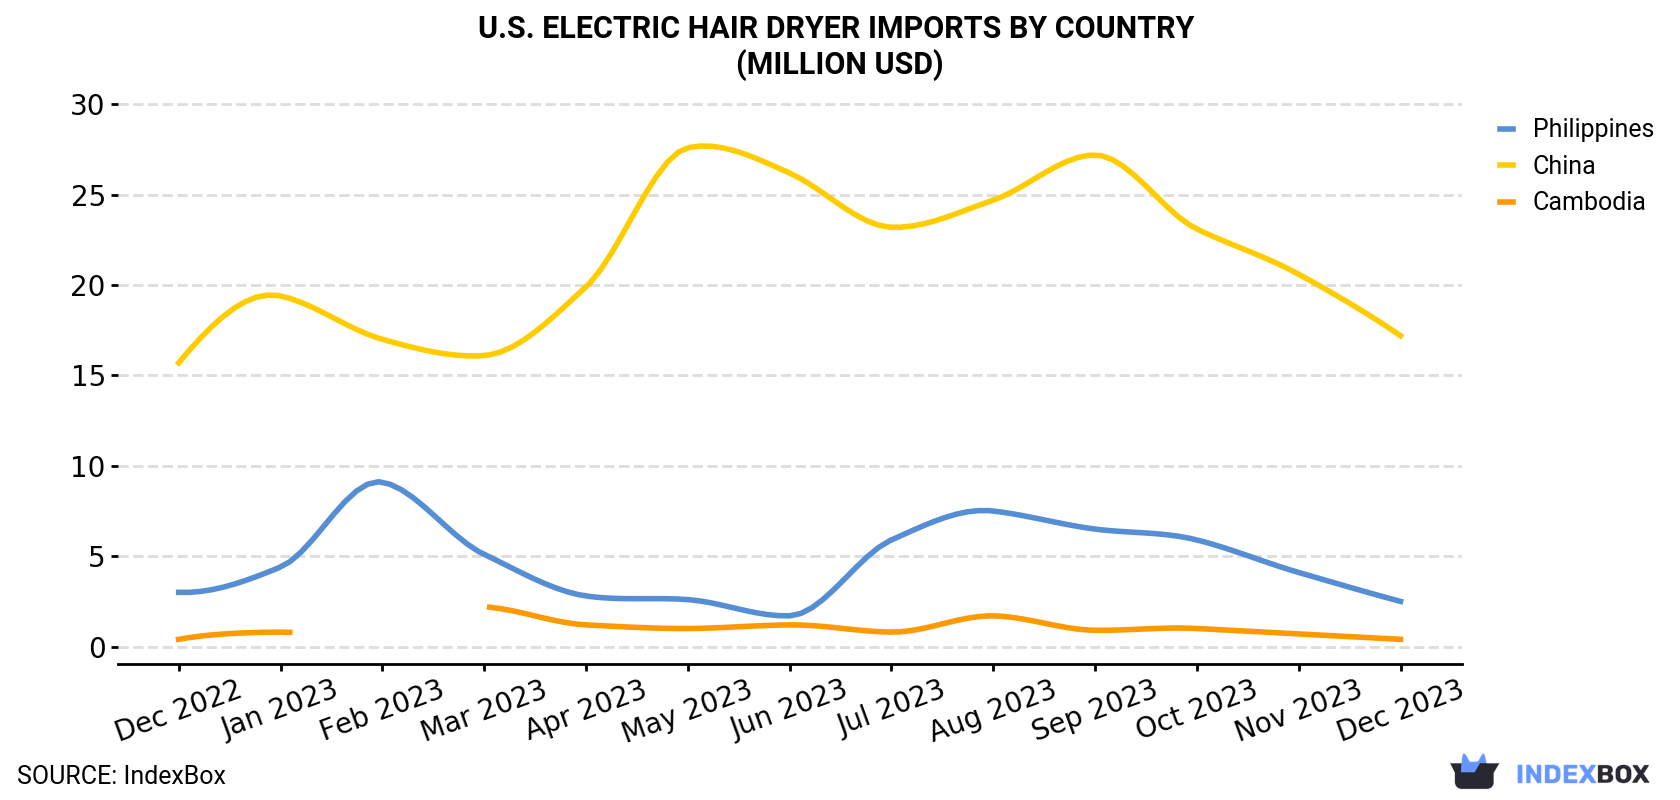 U.S. Electric Hair Dryer Imports By Country (Million USD)